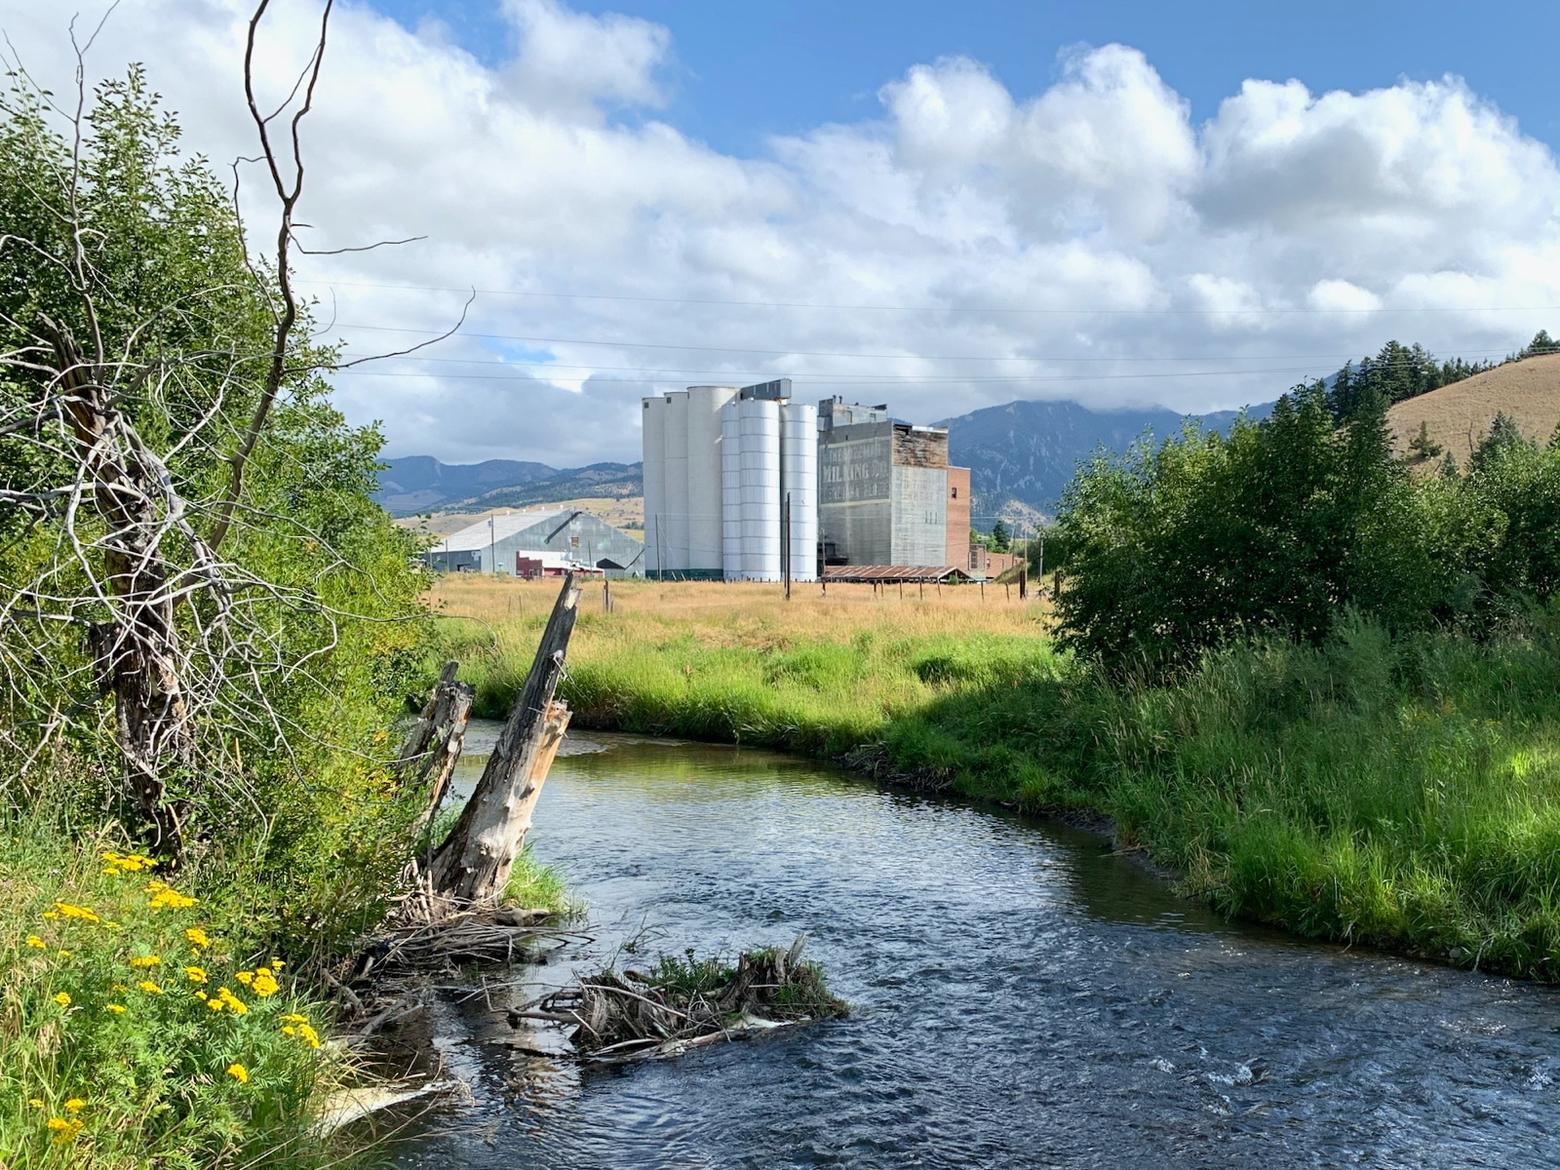 The East Gallatin flows near the old Story Mill at the edge of Bozeman.  From both population growth and climate change, will Bozeman have enough water  to meet human needs in coming decades?  Photo courtesy Jon Catton